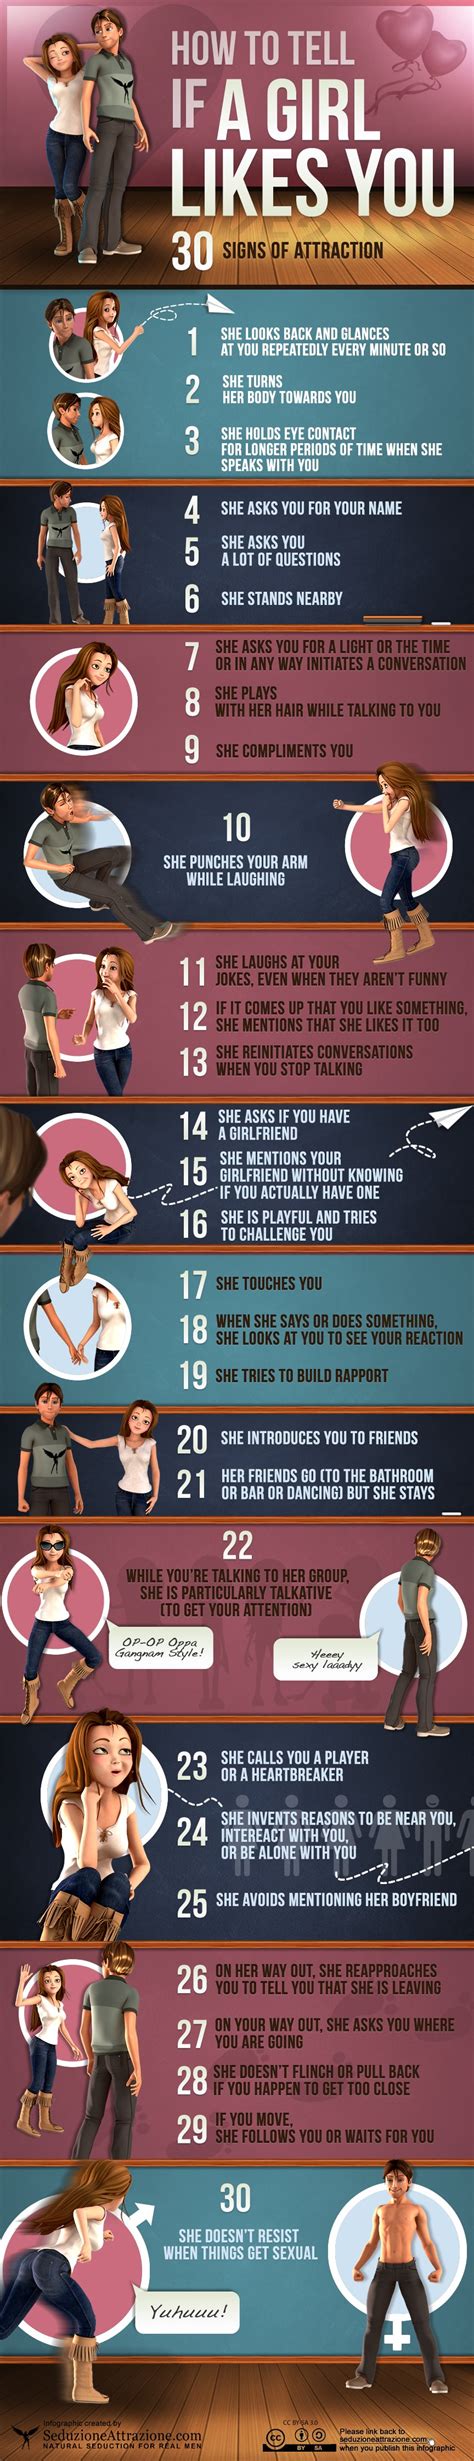 30 signs of attraction if a girl likes you [infographic]